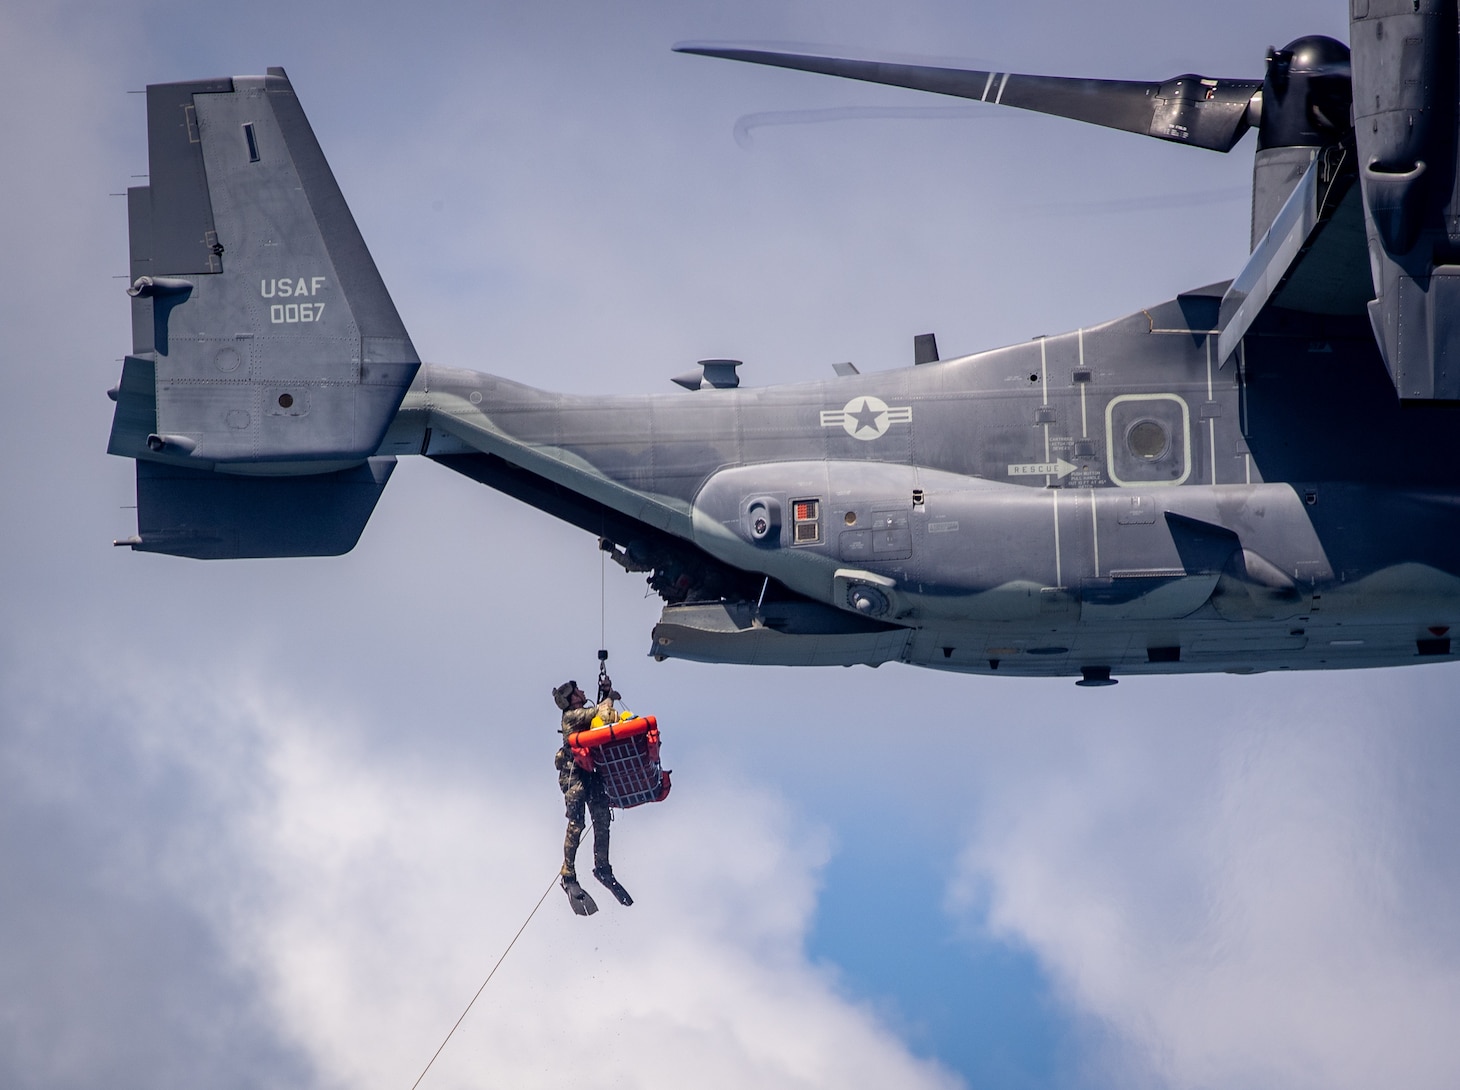 A U.S. Naval Special Warfare (NSW) operator conducts a medical evacuation hoist during interoperability training with a 353rd Special Operations Wing CV-22 Osprey.